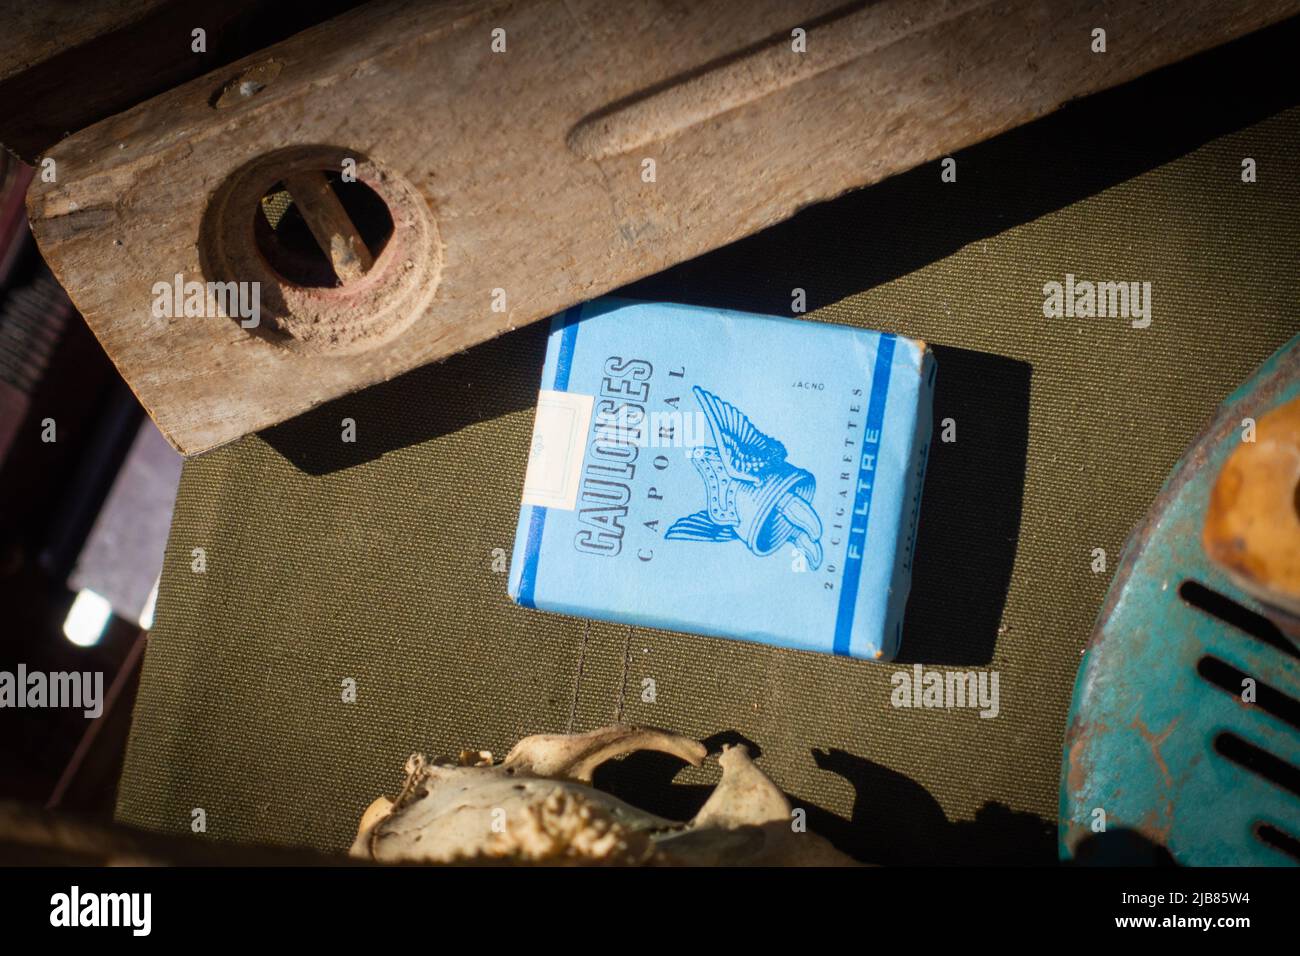 Old Packet of Gauloises cigarettes at a Vide Grenier, Car Boot sale in France Stock Photo